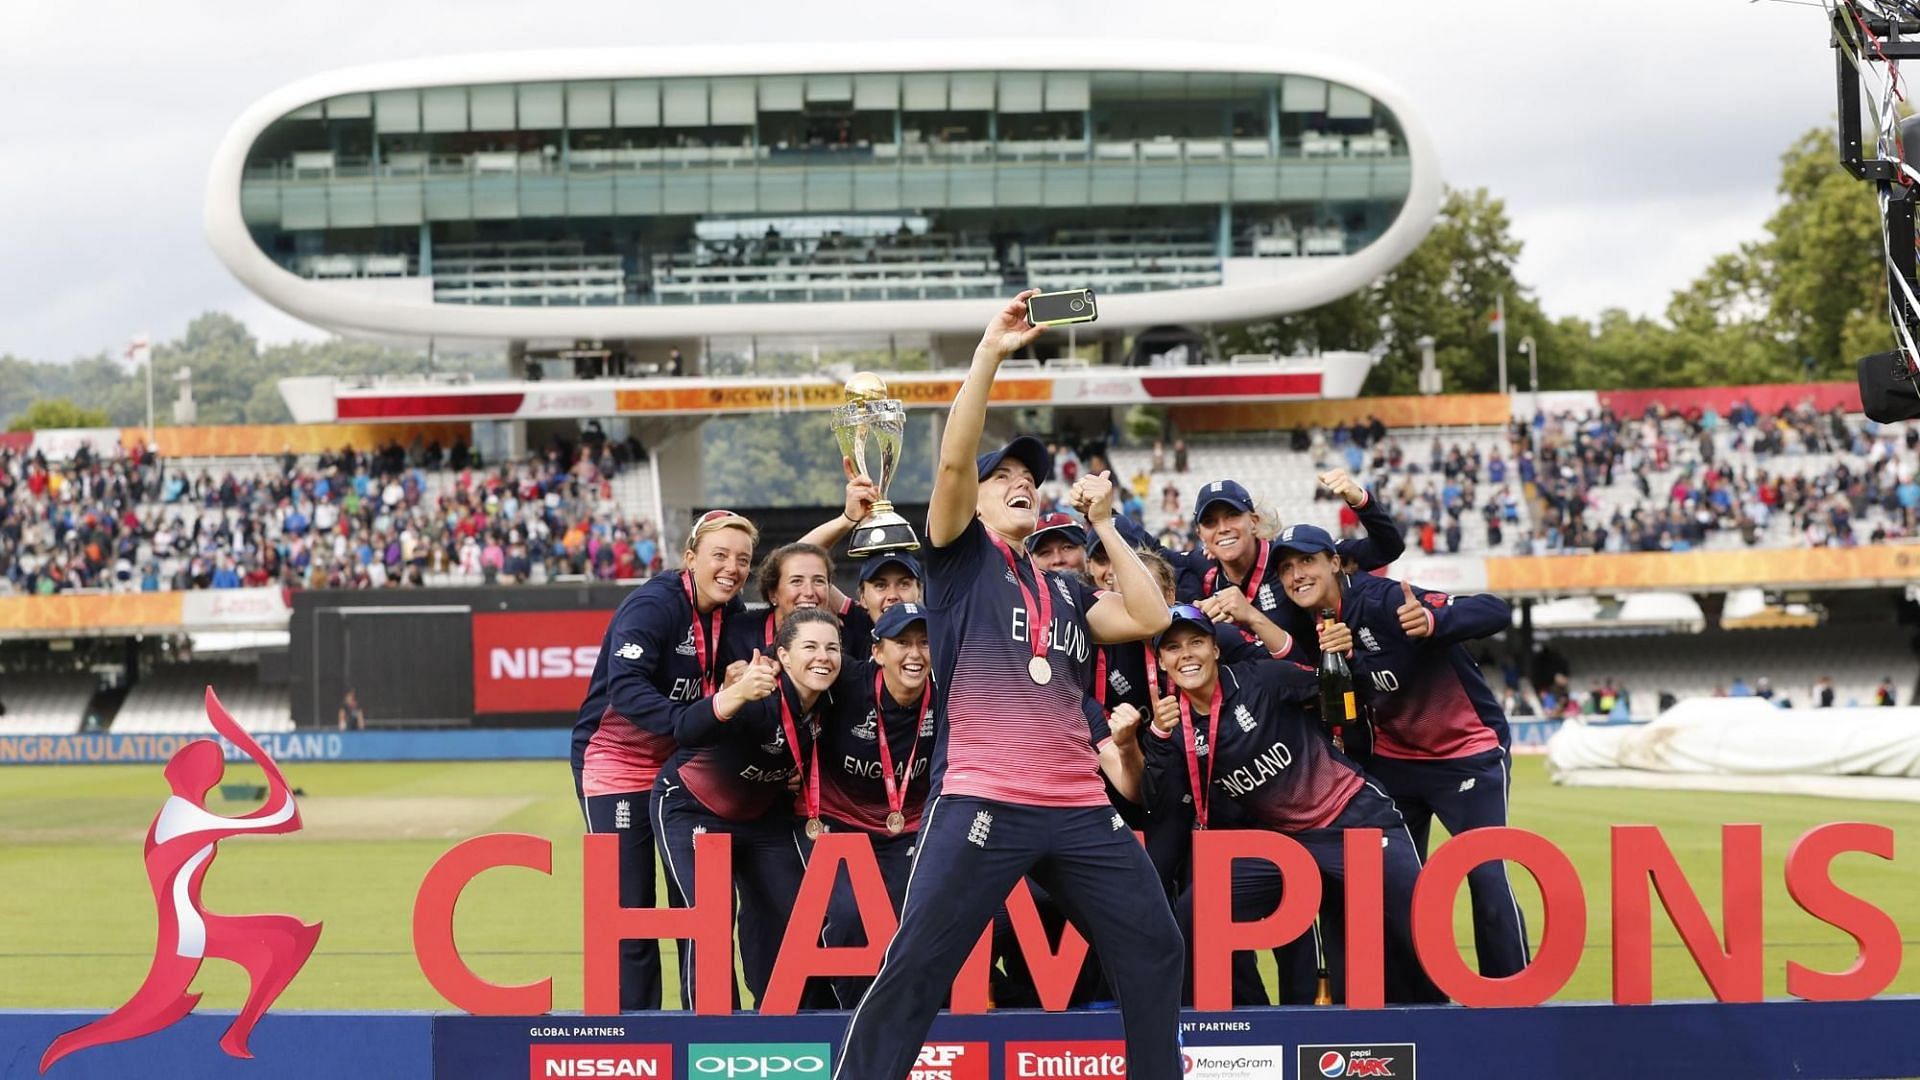 England won the World Cup for the fourth time in 2017